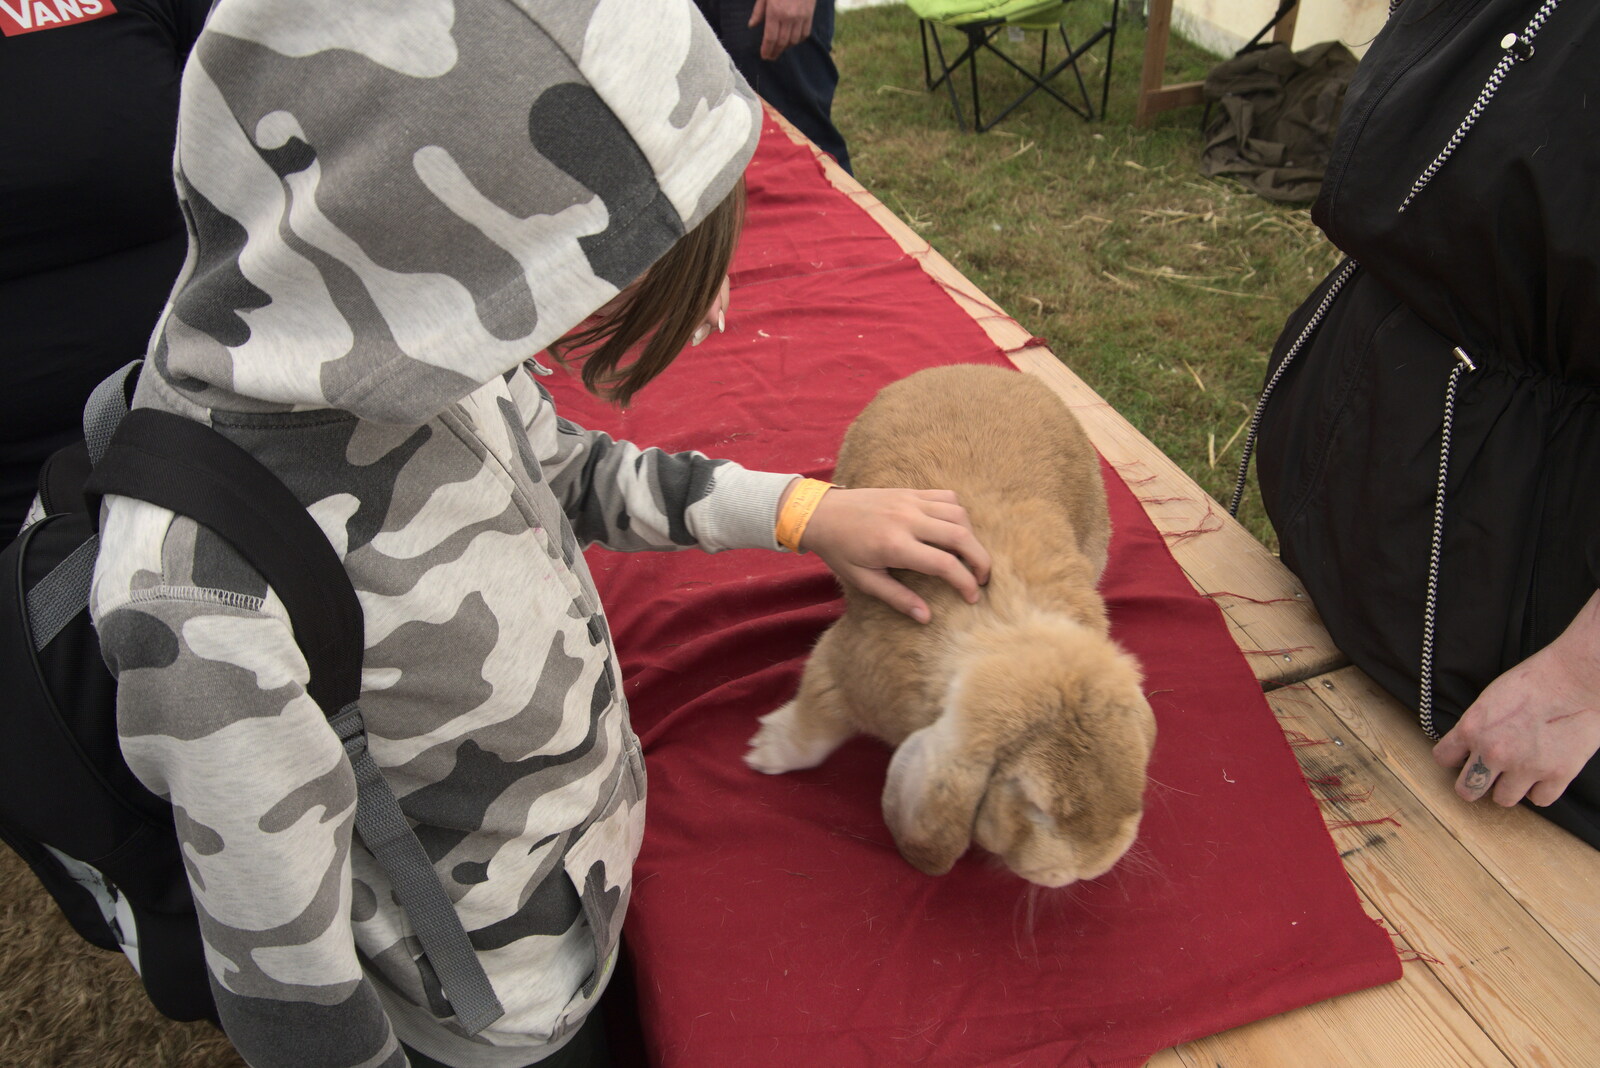 The Suffolk Show, Trinity Park, Ipswich - 1st June 2022: Harry interacts with a very large rabbit